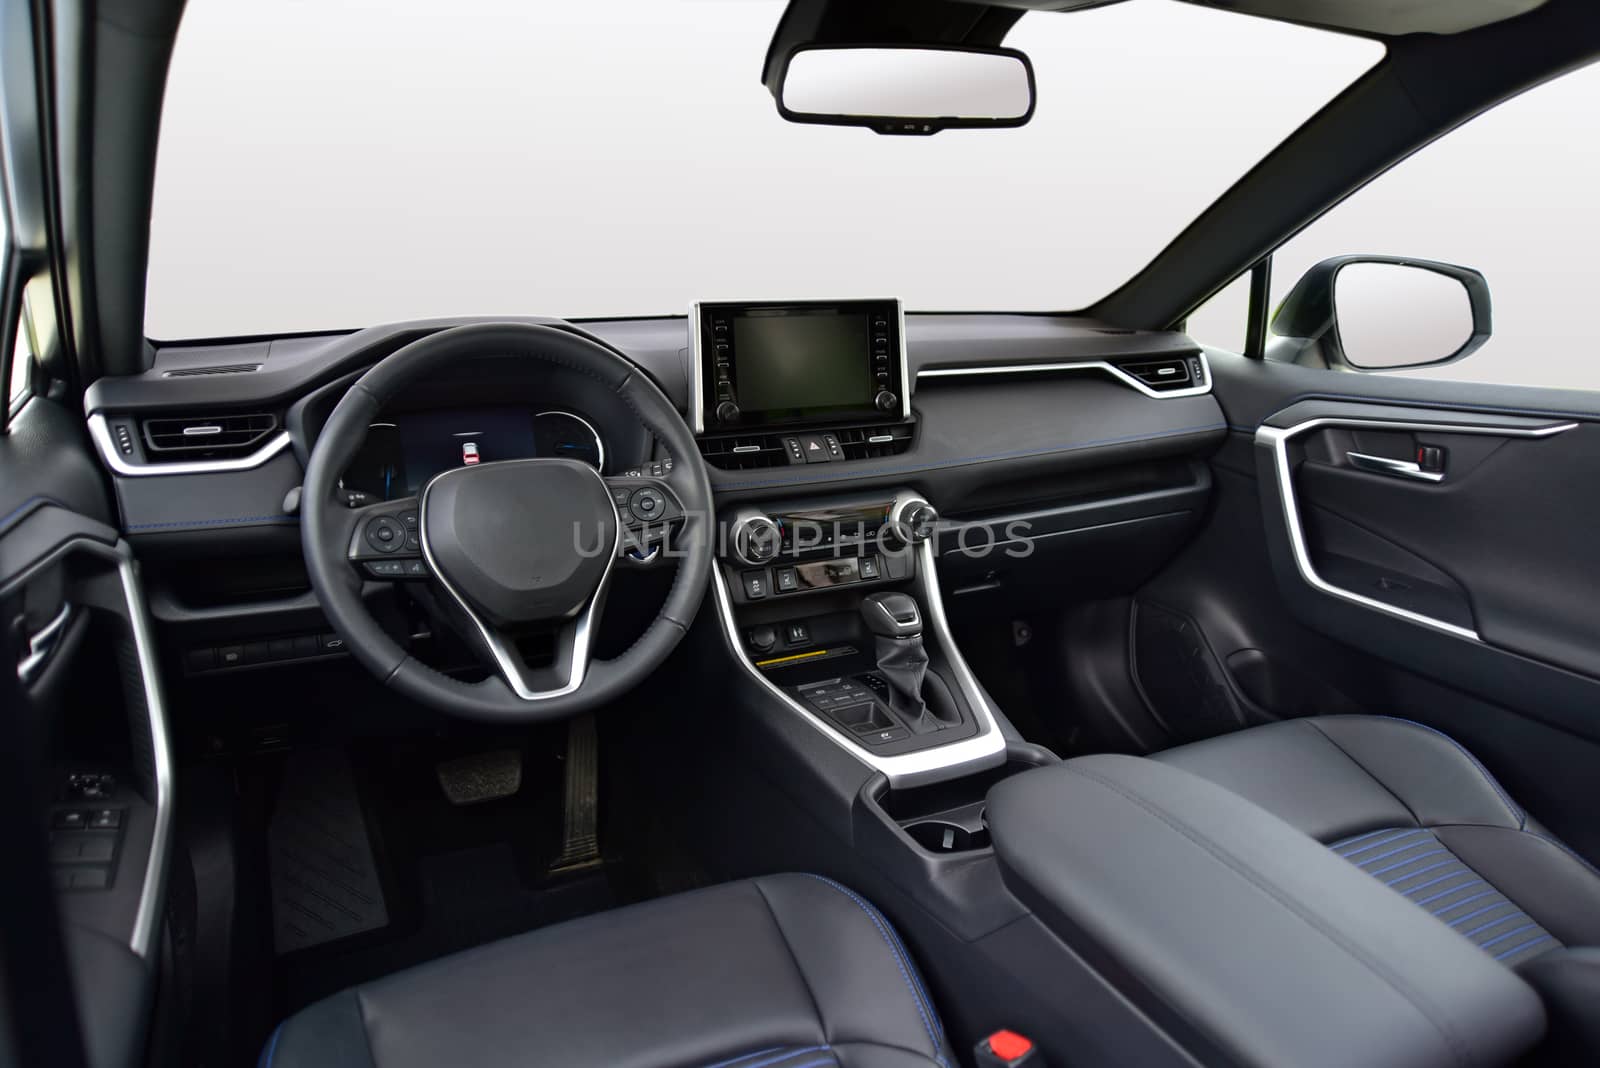 interior of a modern car by aselsa